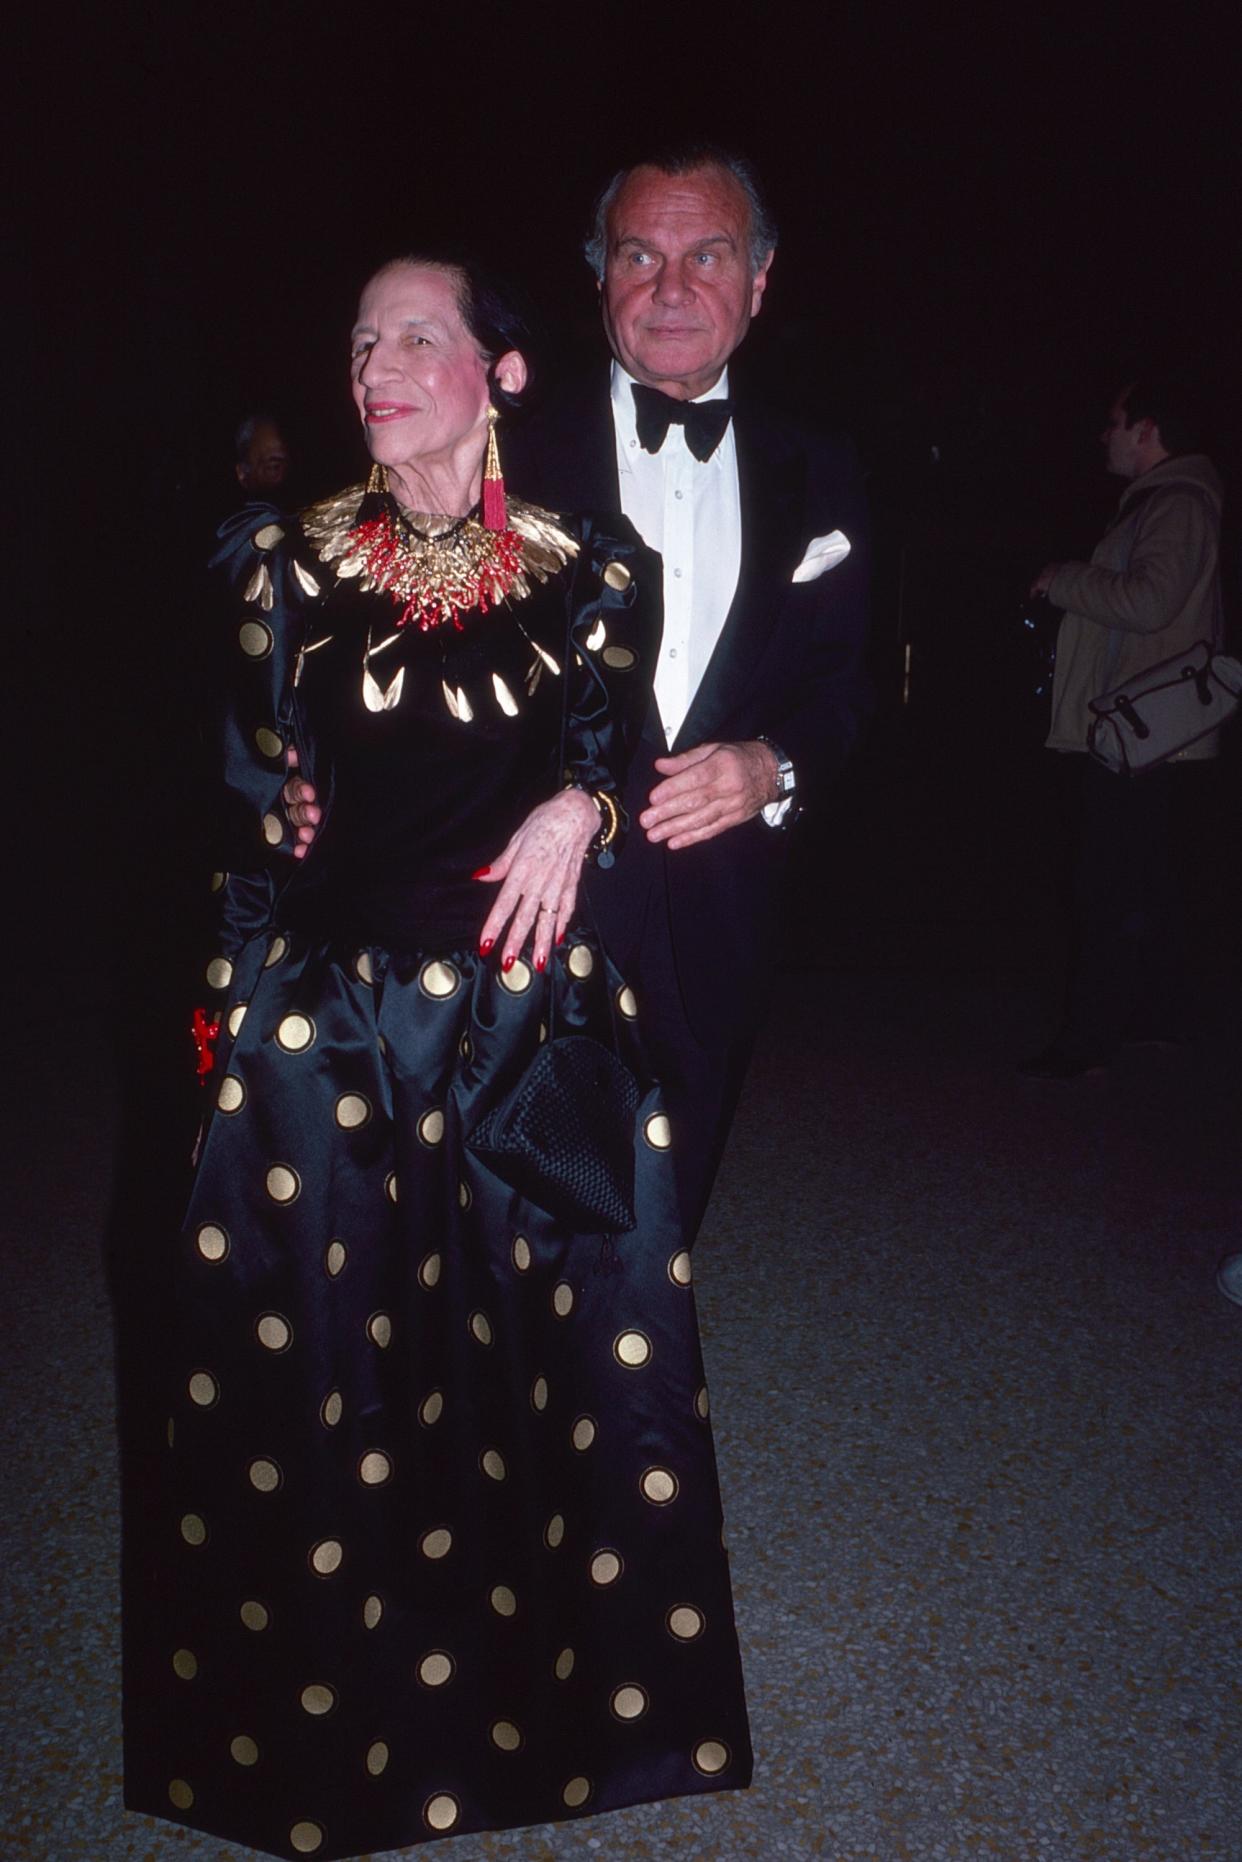 Diana Vreeland and Bill Blass at the Met Gala in 1981.